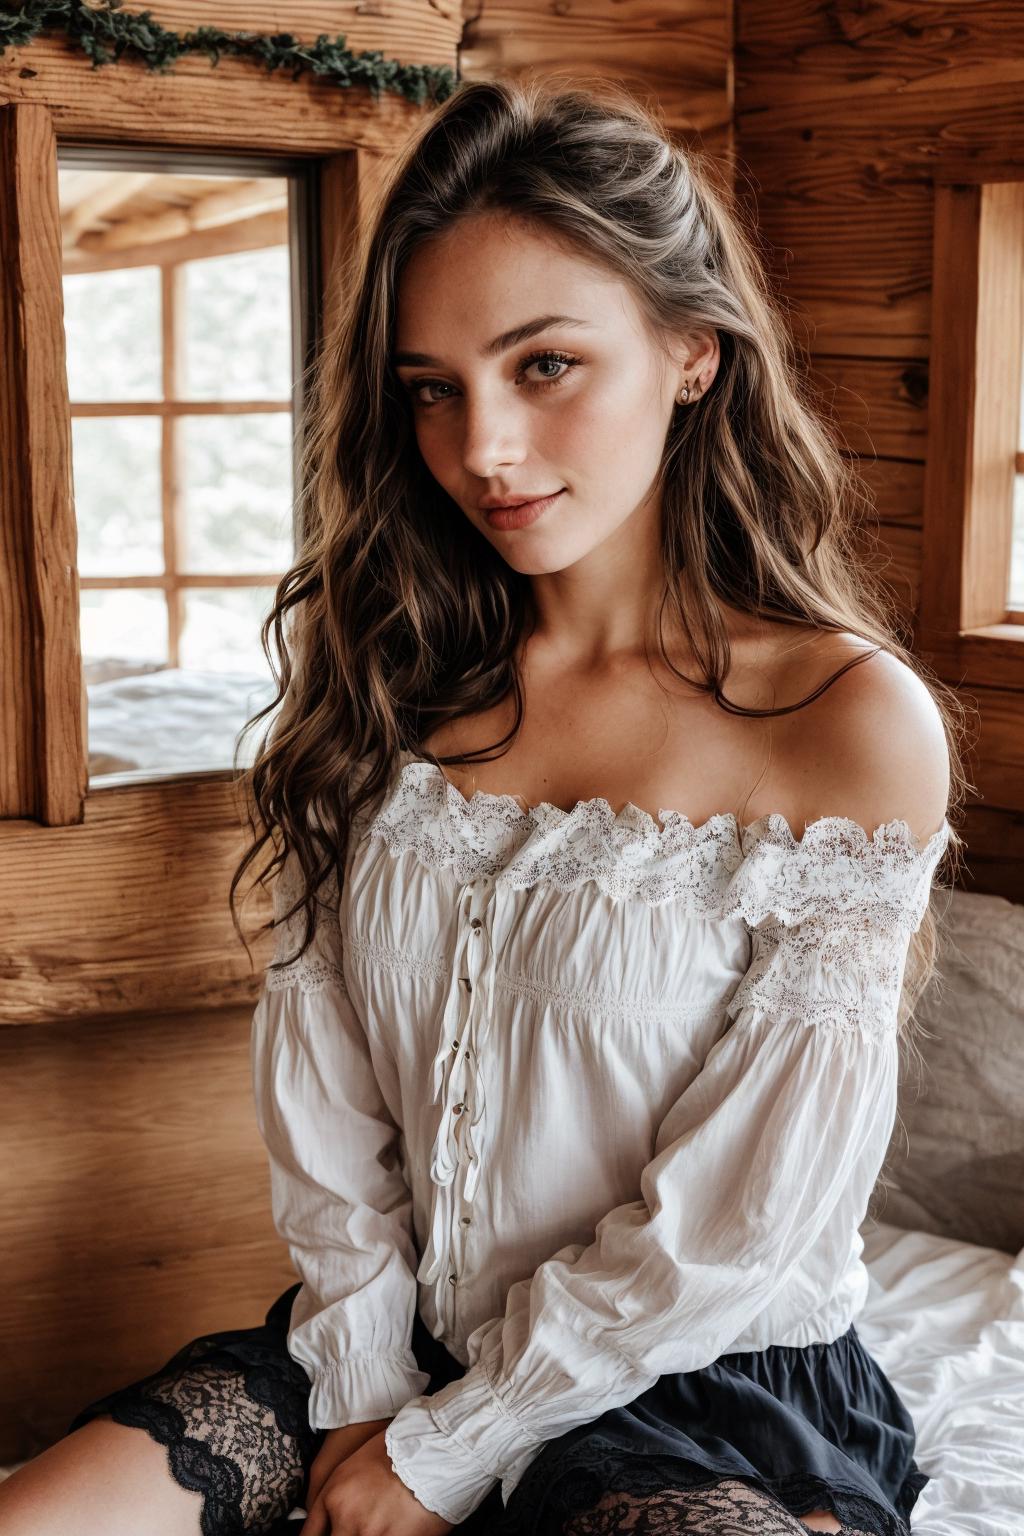 A Young Woman in a White Lace Top Posing for a Picture.